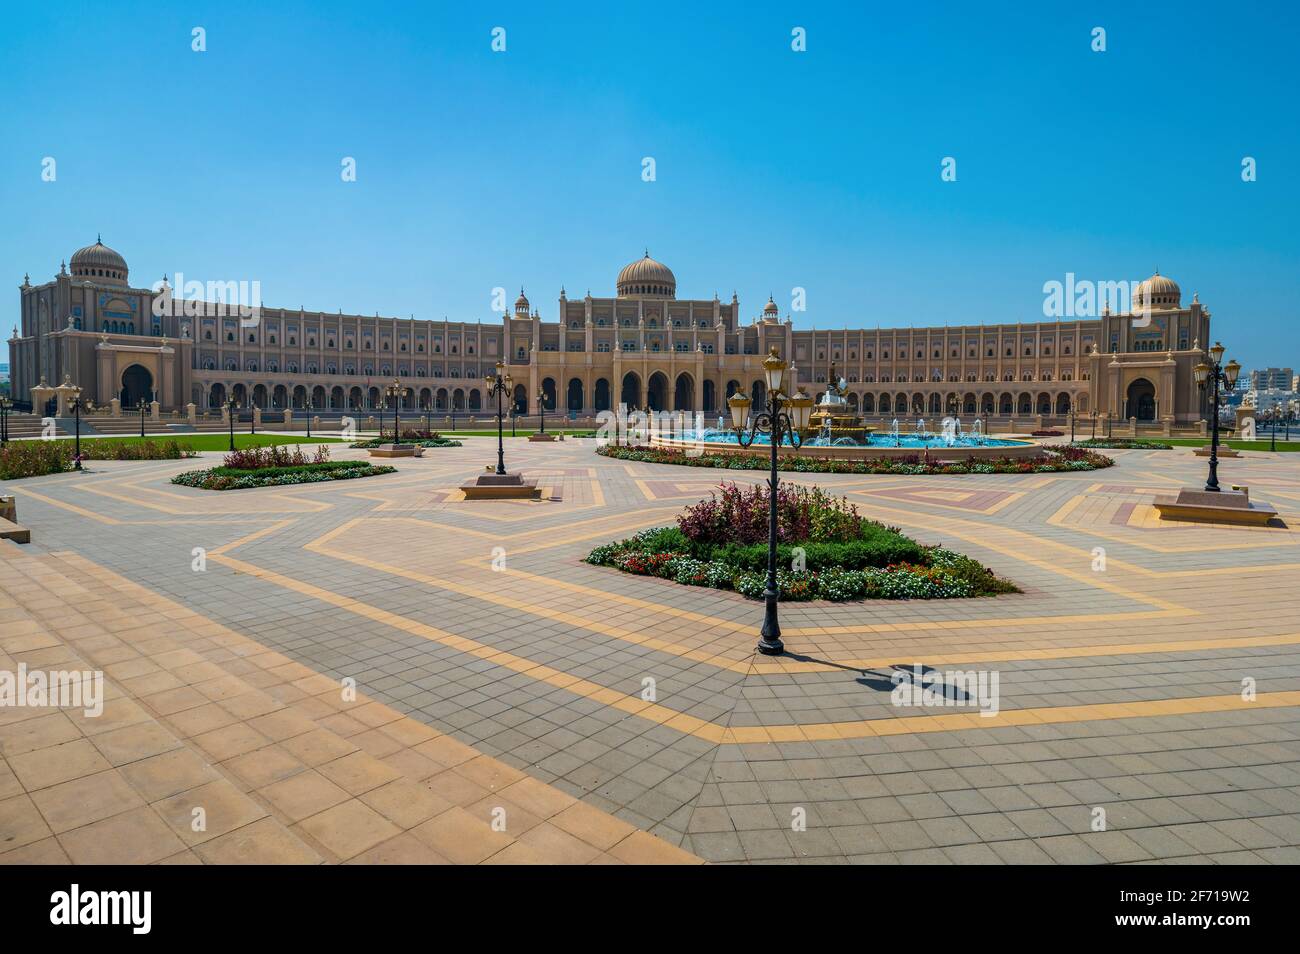 Sharjah, United Arab Emirates - March 24, 2021:Sharjah Municipality main office resembling parliament building characterised by islamic architecture i Stock Photo